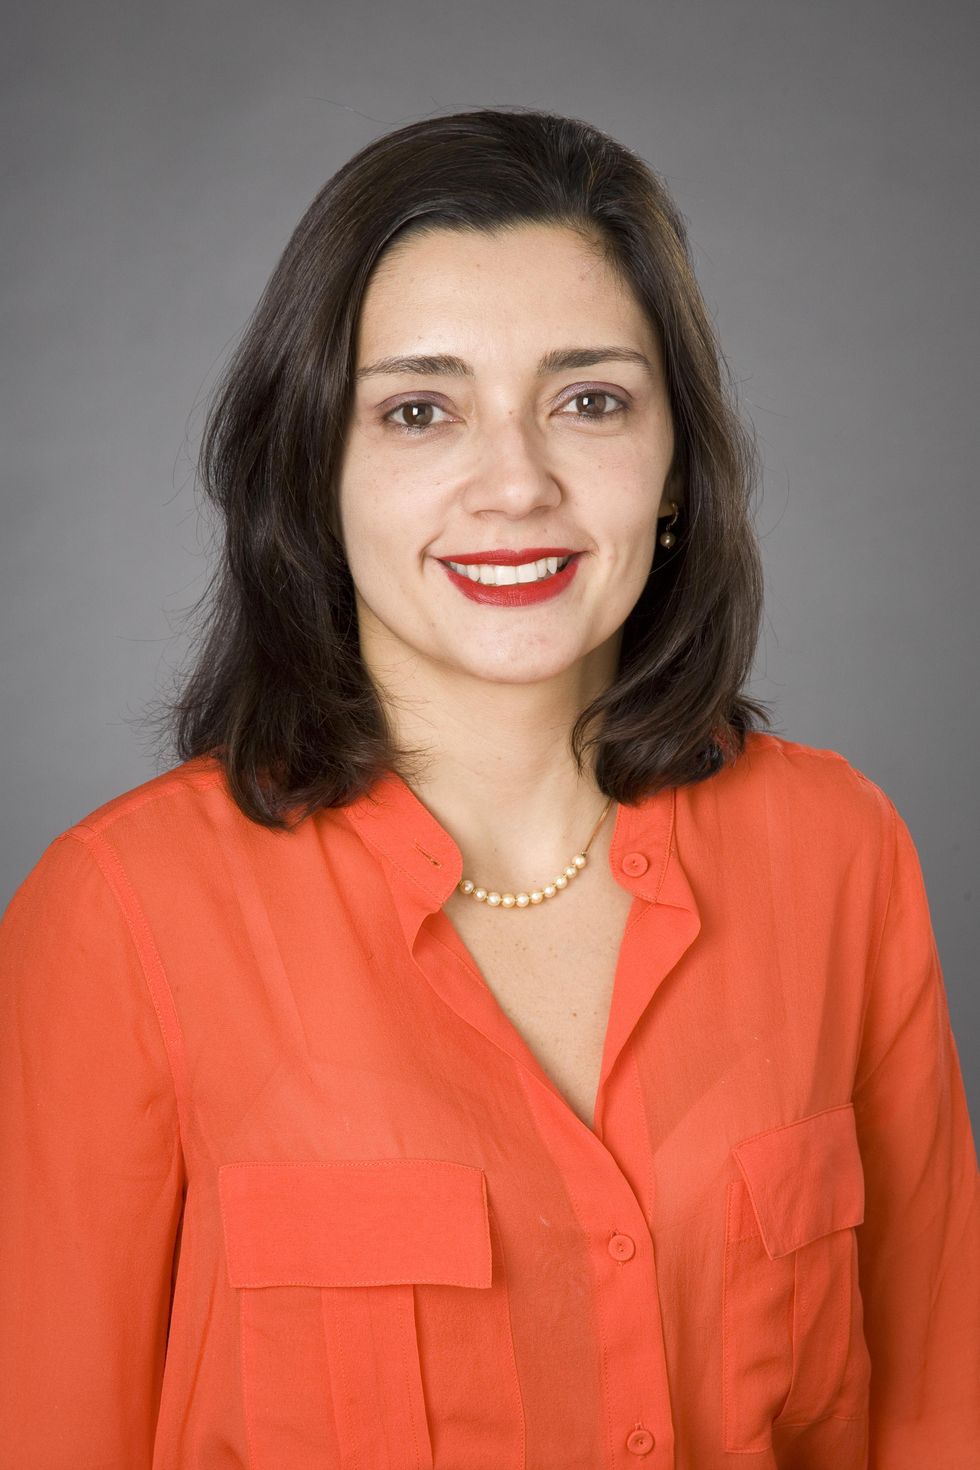 Juliana Freire smiles at camera posing against a gray background